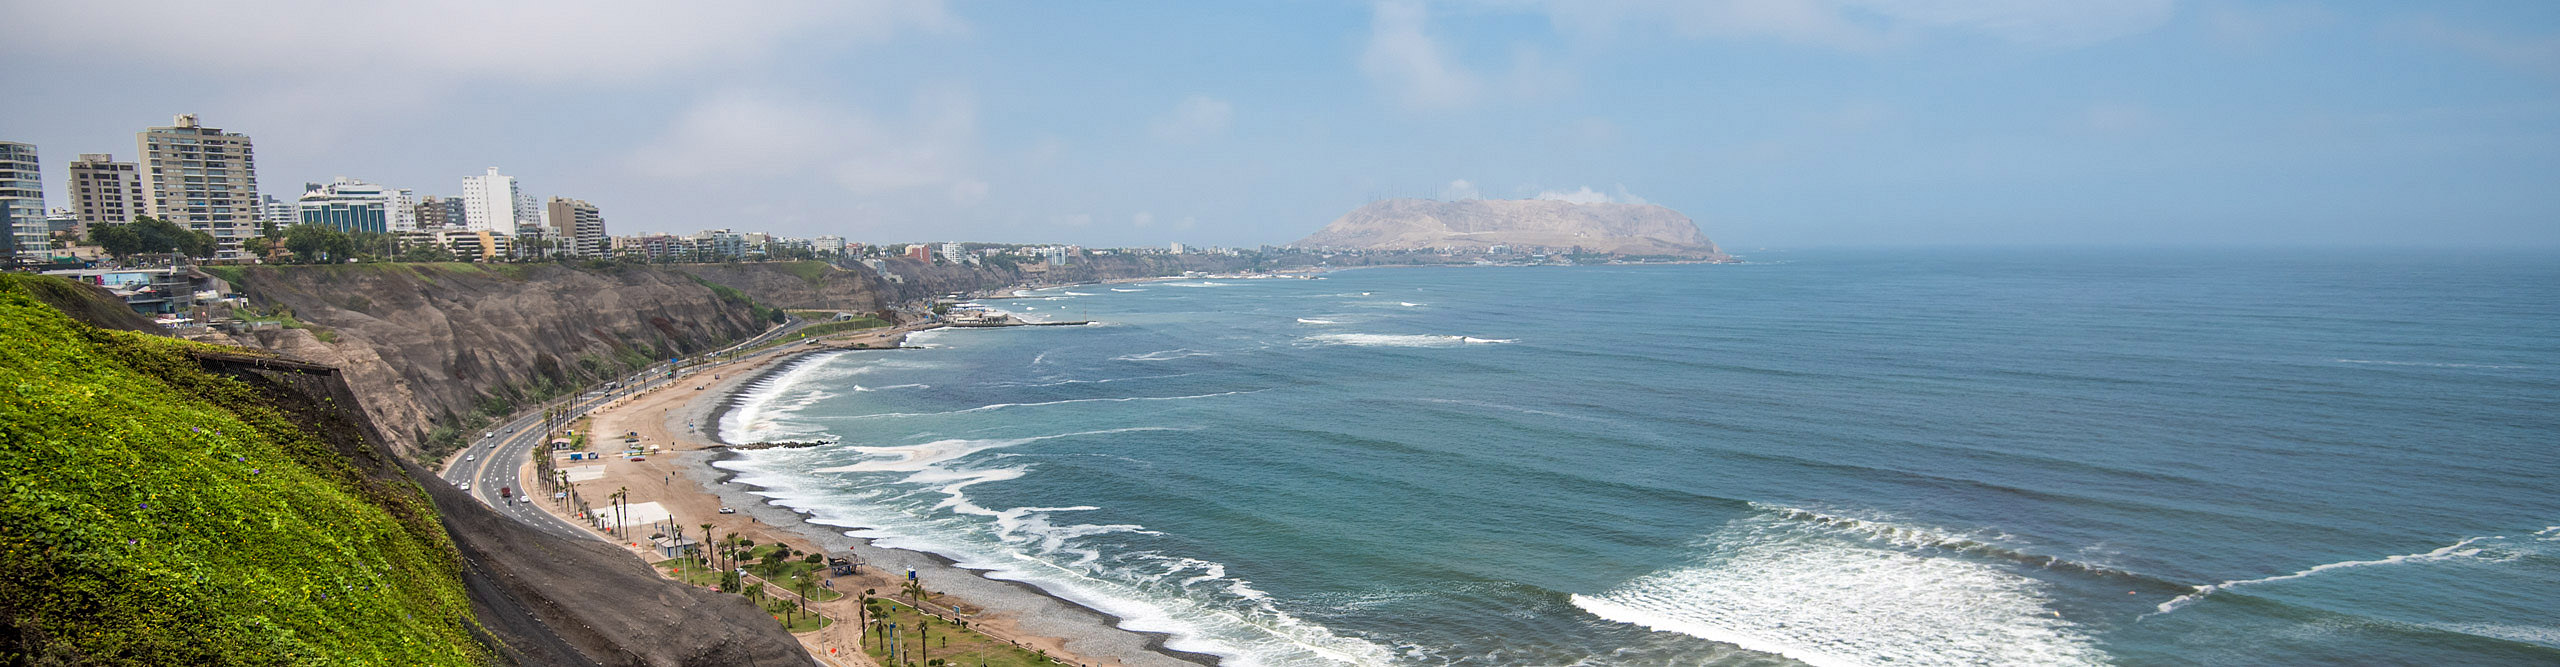 Vie3w of th3 coastline in Lima, Peru, with waves crashing and a clear sky, 